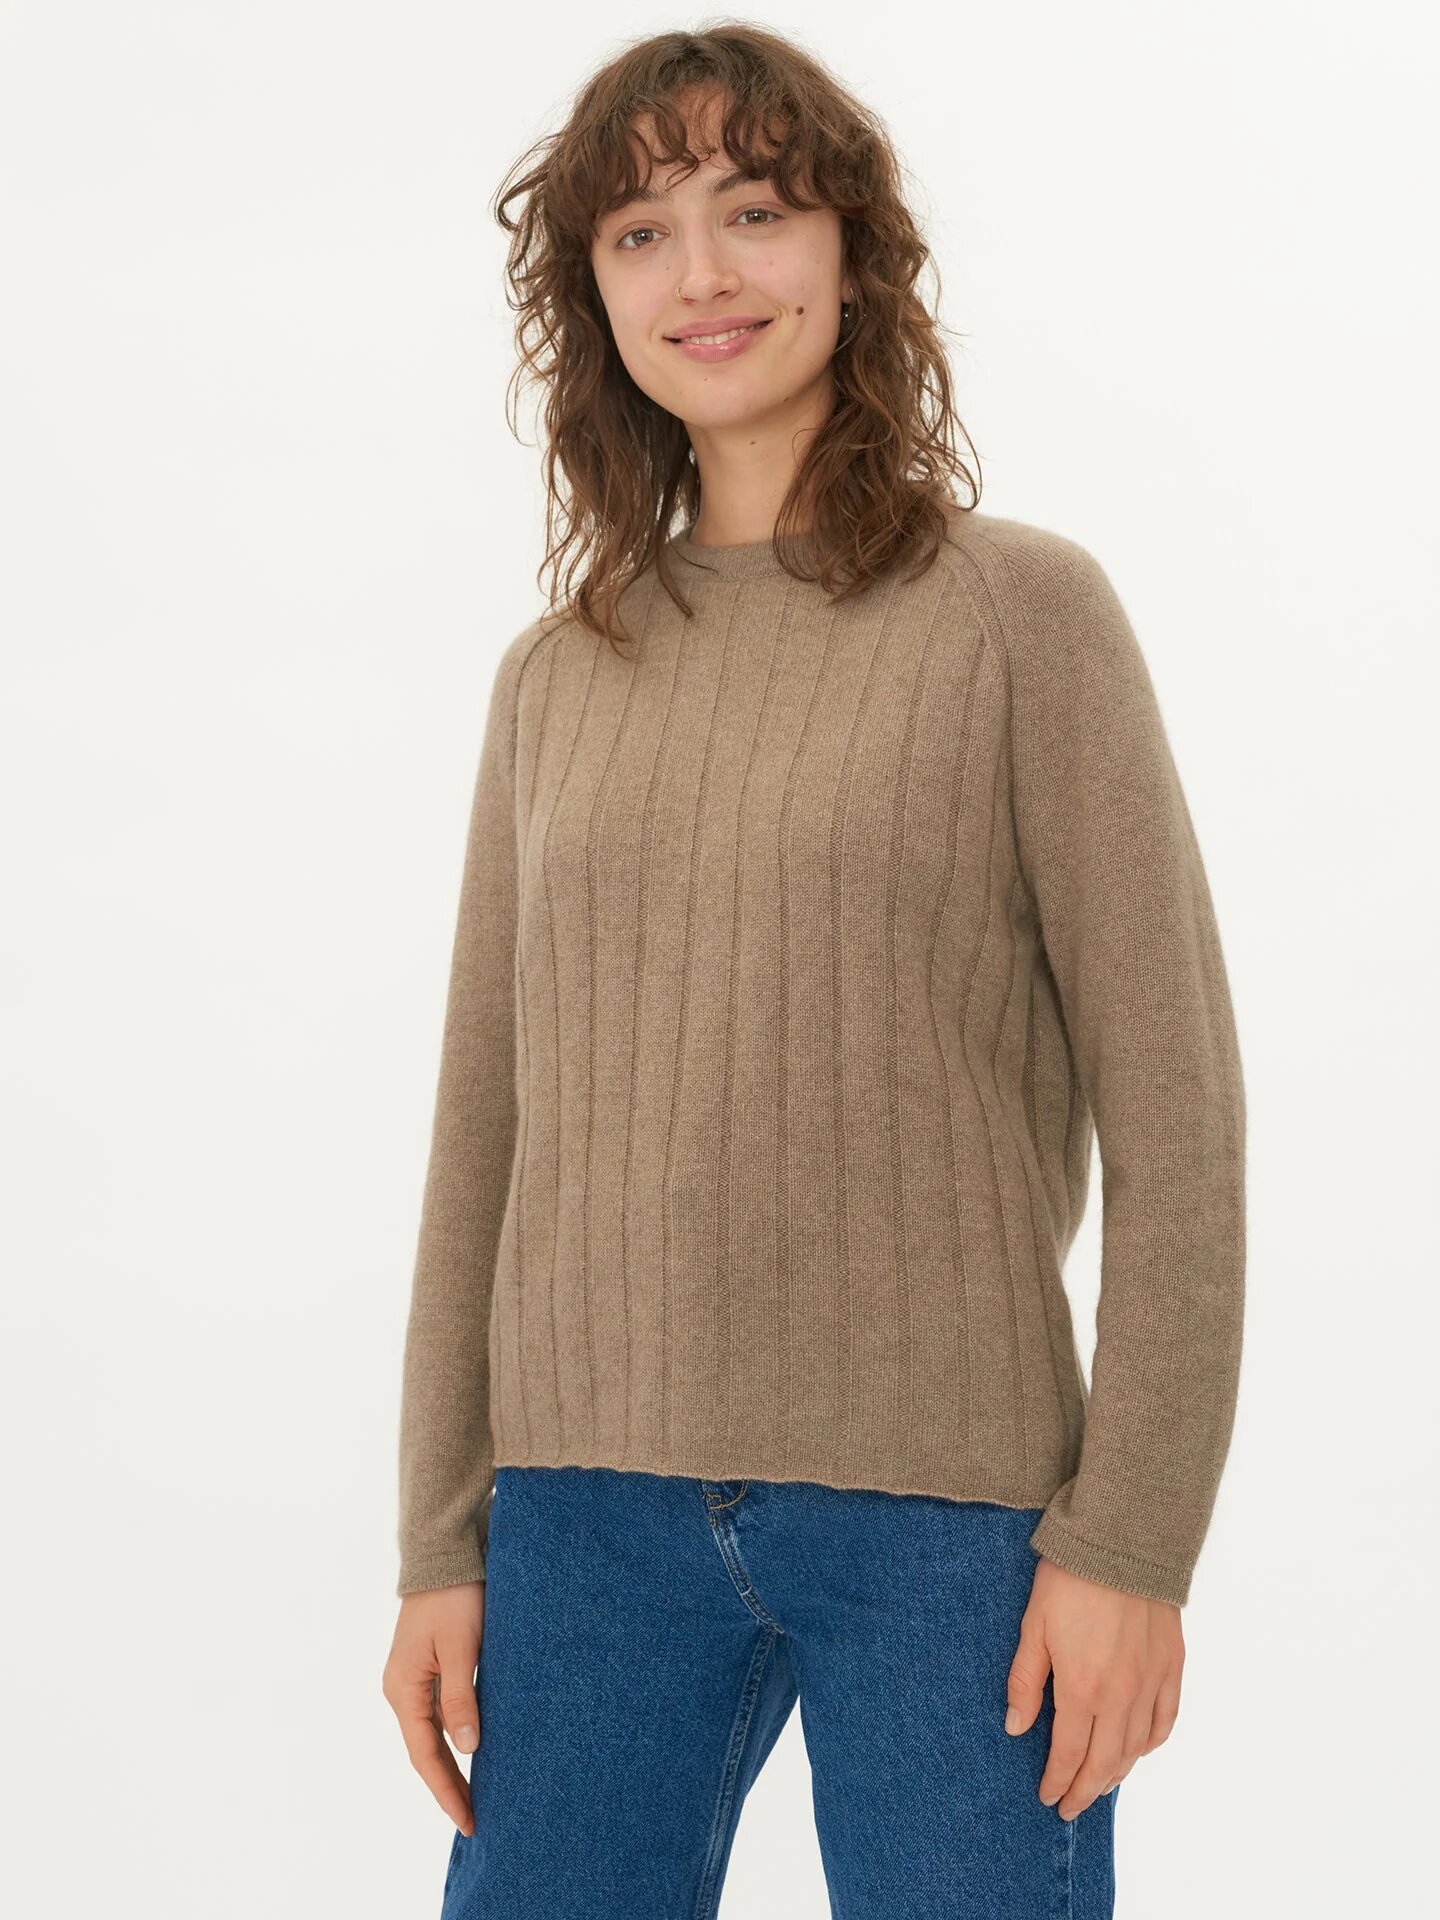 Up to 10% Off  Organic Color Cashmere Ribbed Body Crew Neck